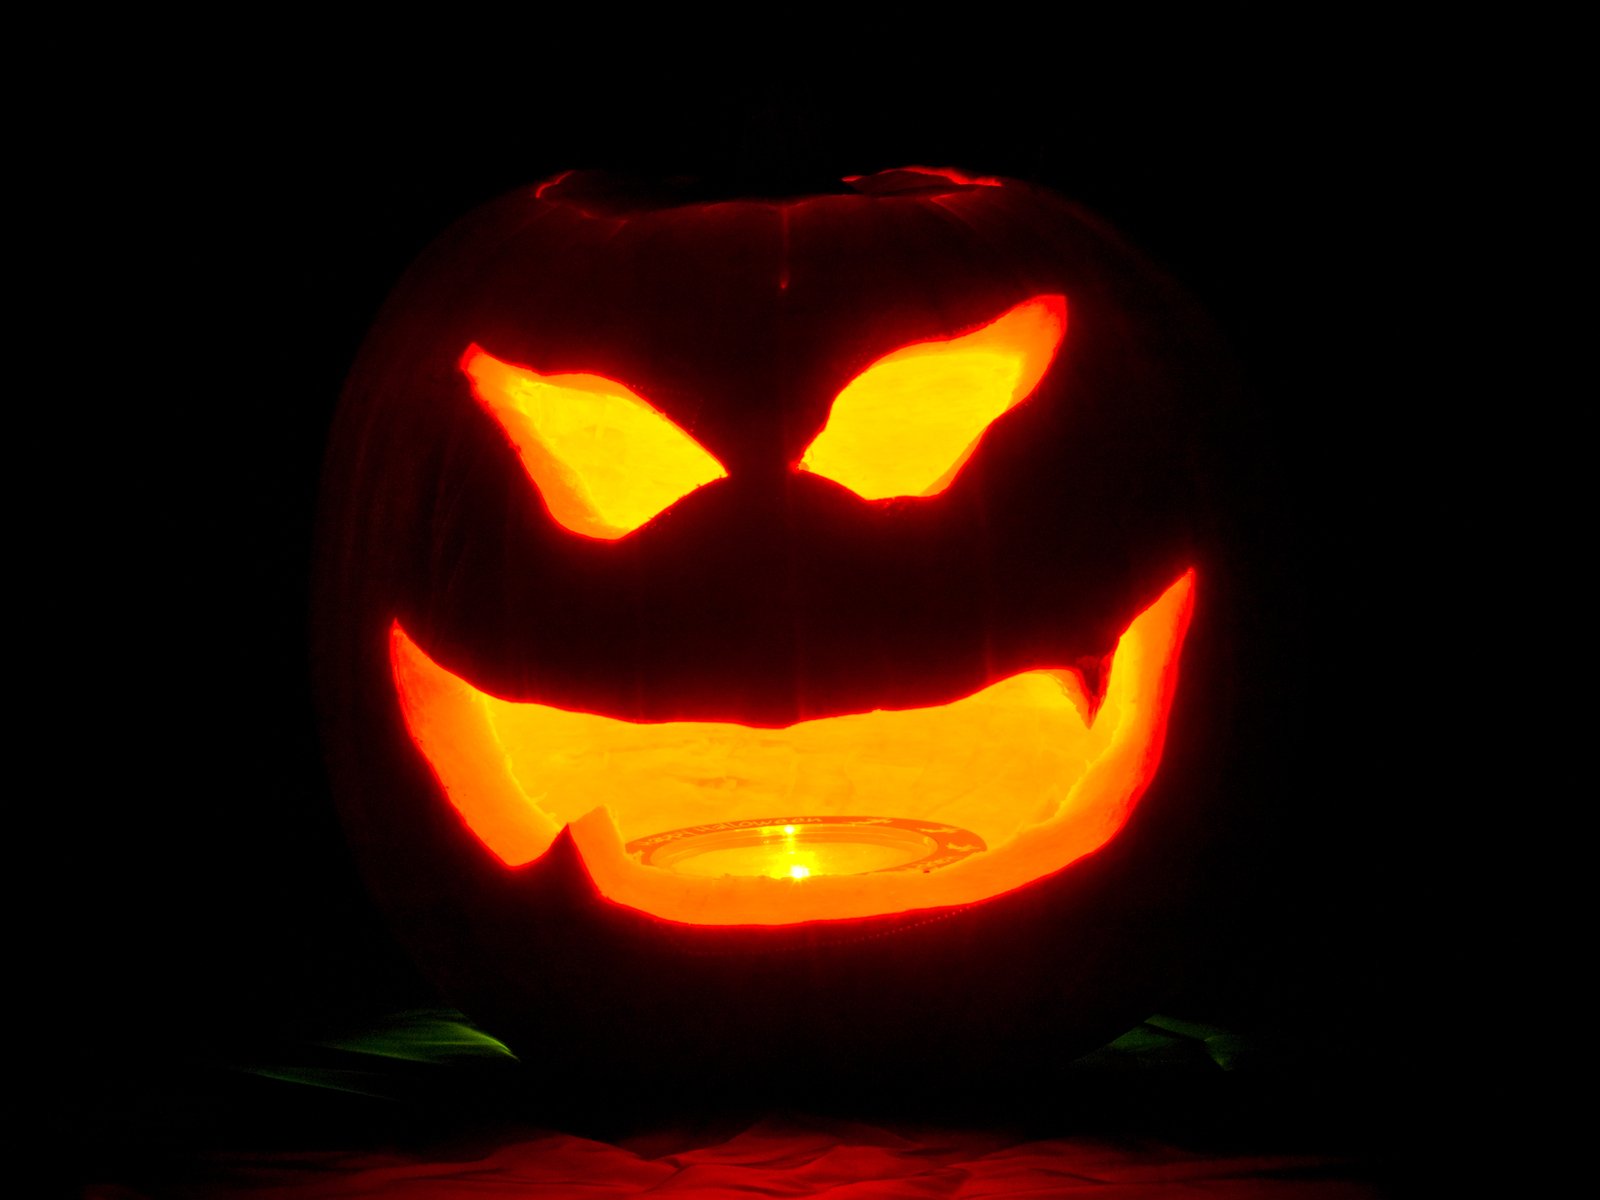 a carved pumpkin lit up with candle light